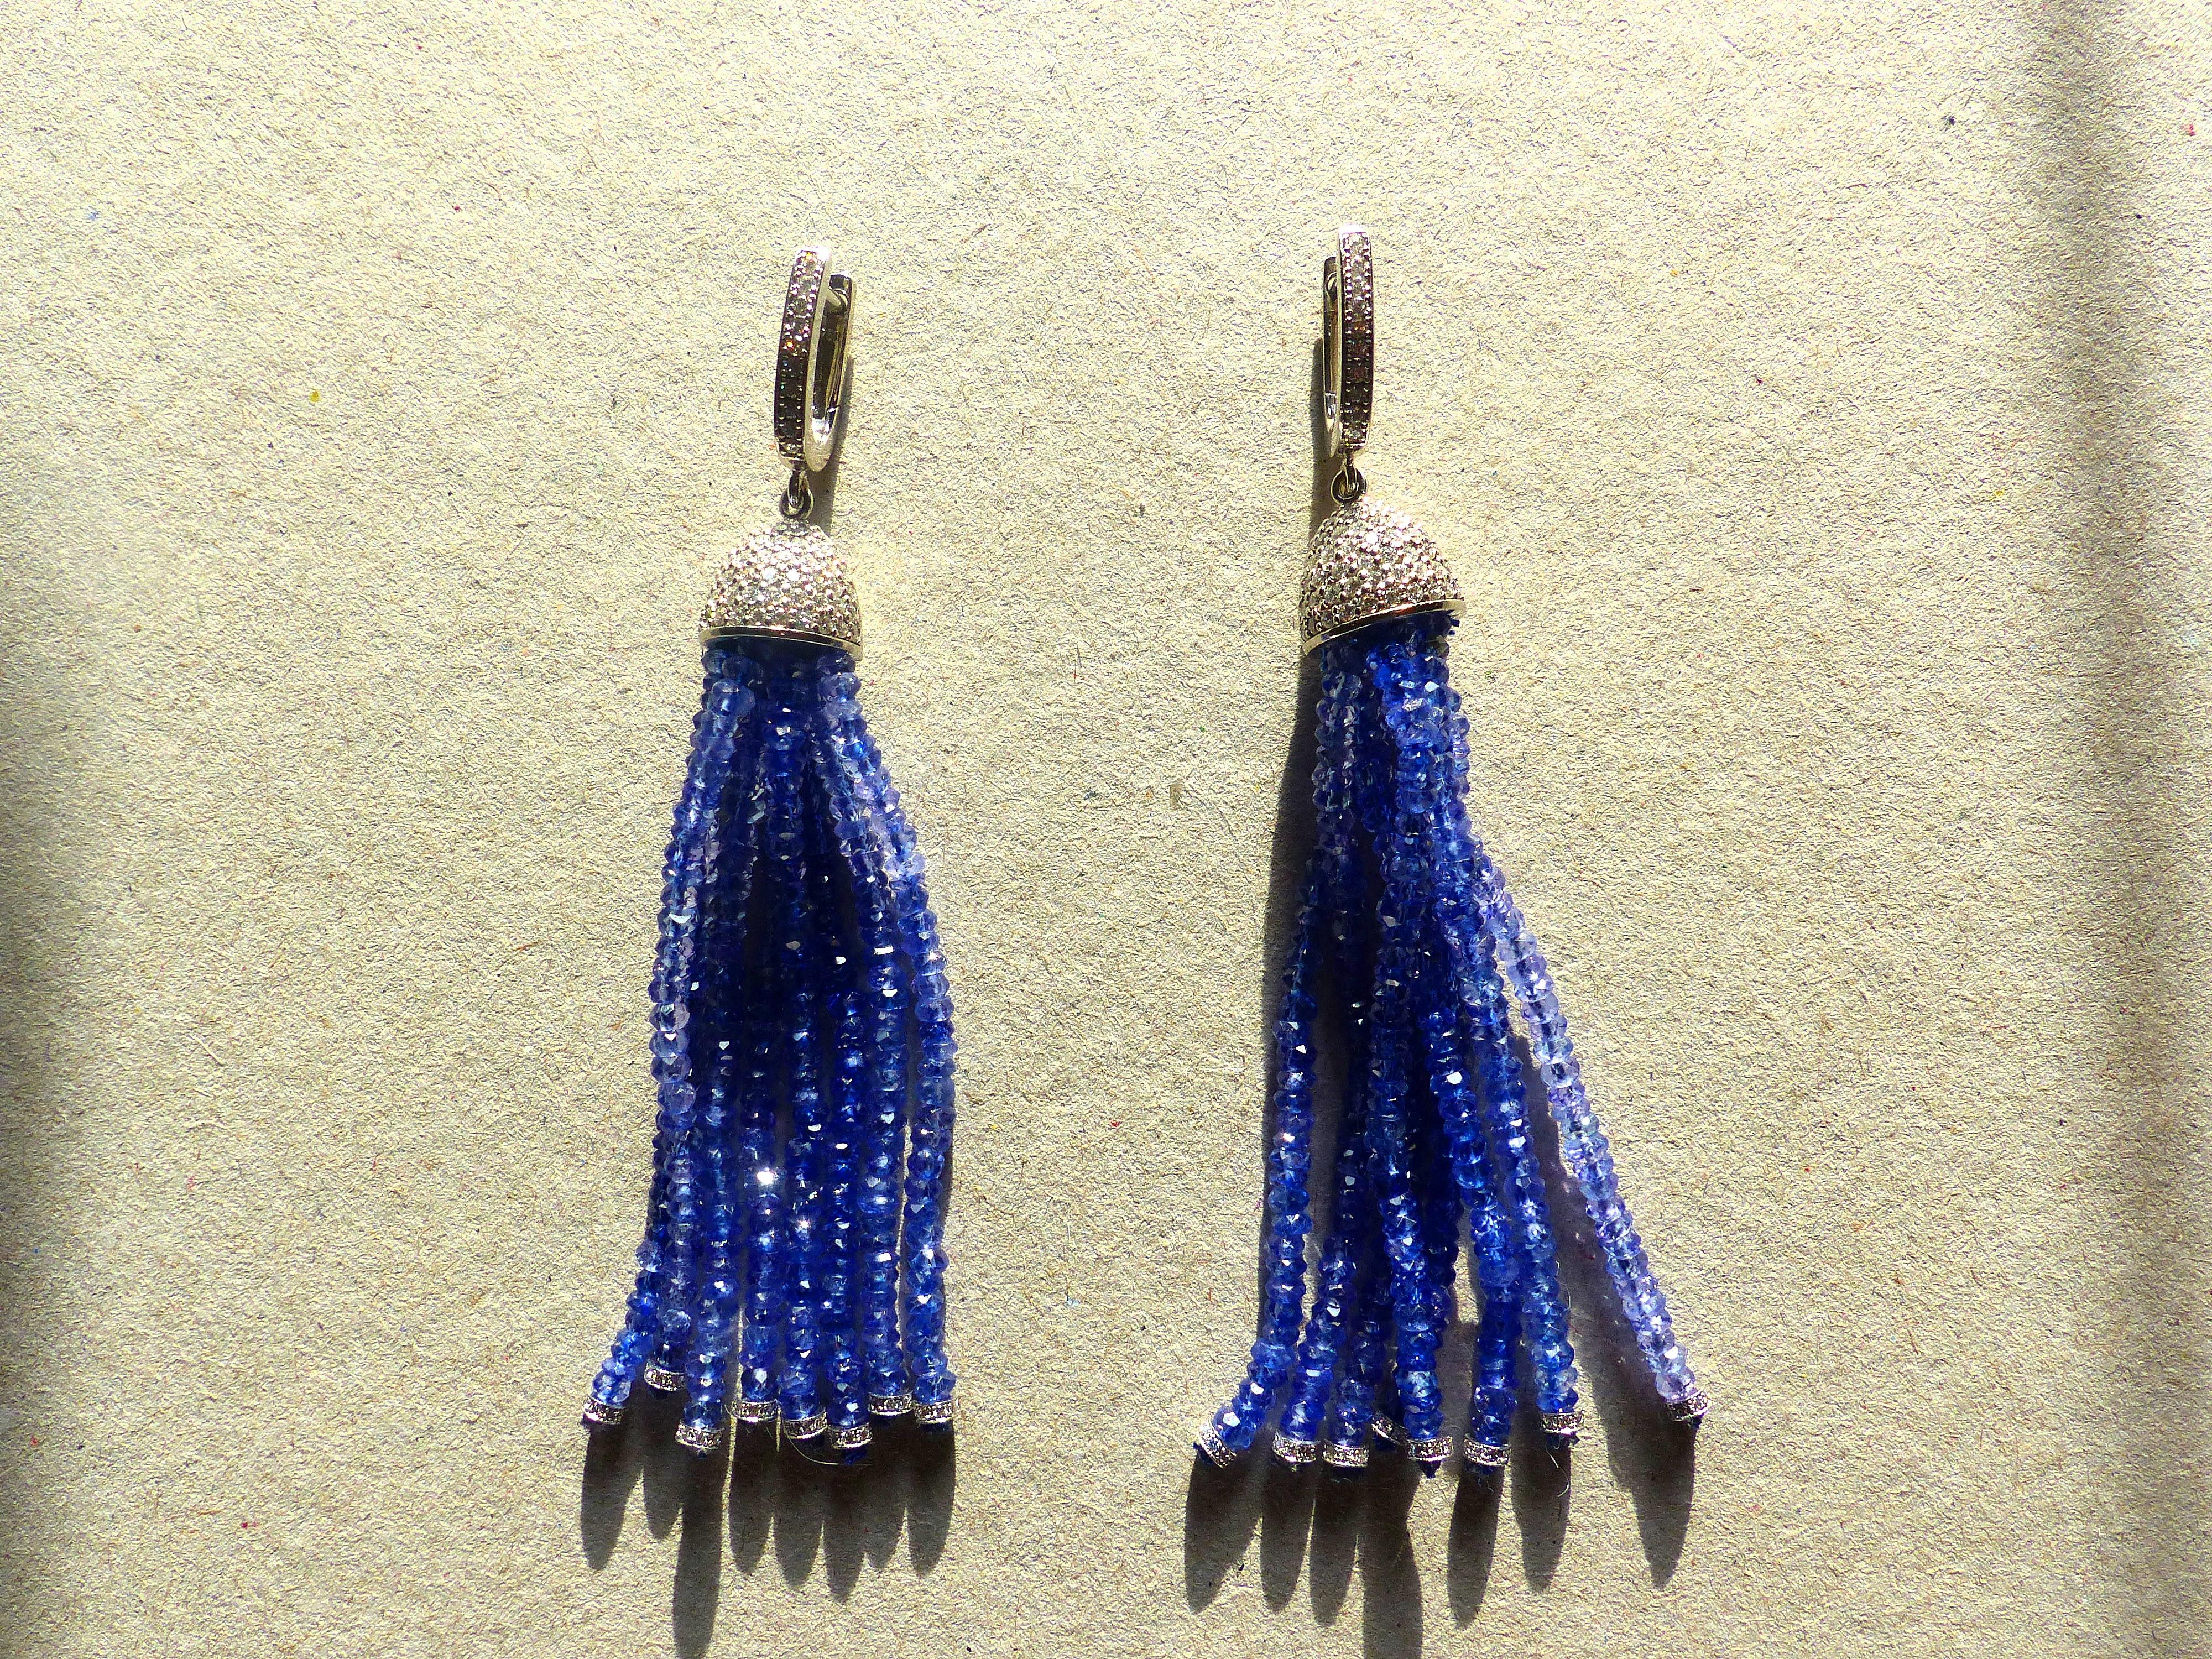 Thomas Leyser is renowned for his contemporary jewellery designs utilizing fine gemstones.

These 18k white gold earrings 16gr. are set with Diamonds fac. round 1-1,2mm, 2.58cts. D/VS and with 2 Sapphire tassels with 25cts..

These earrings are